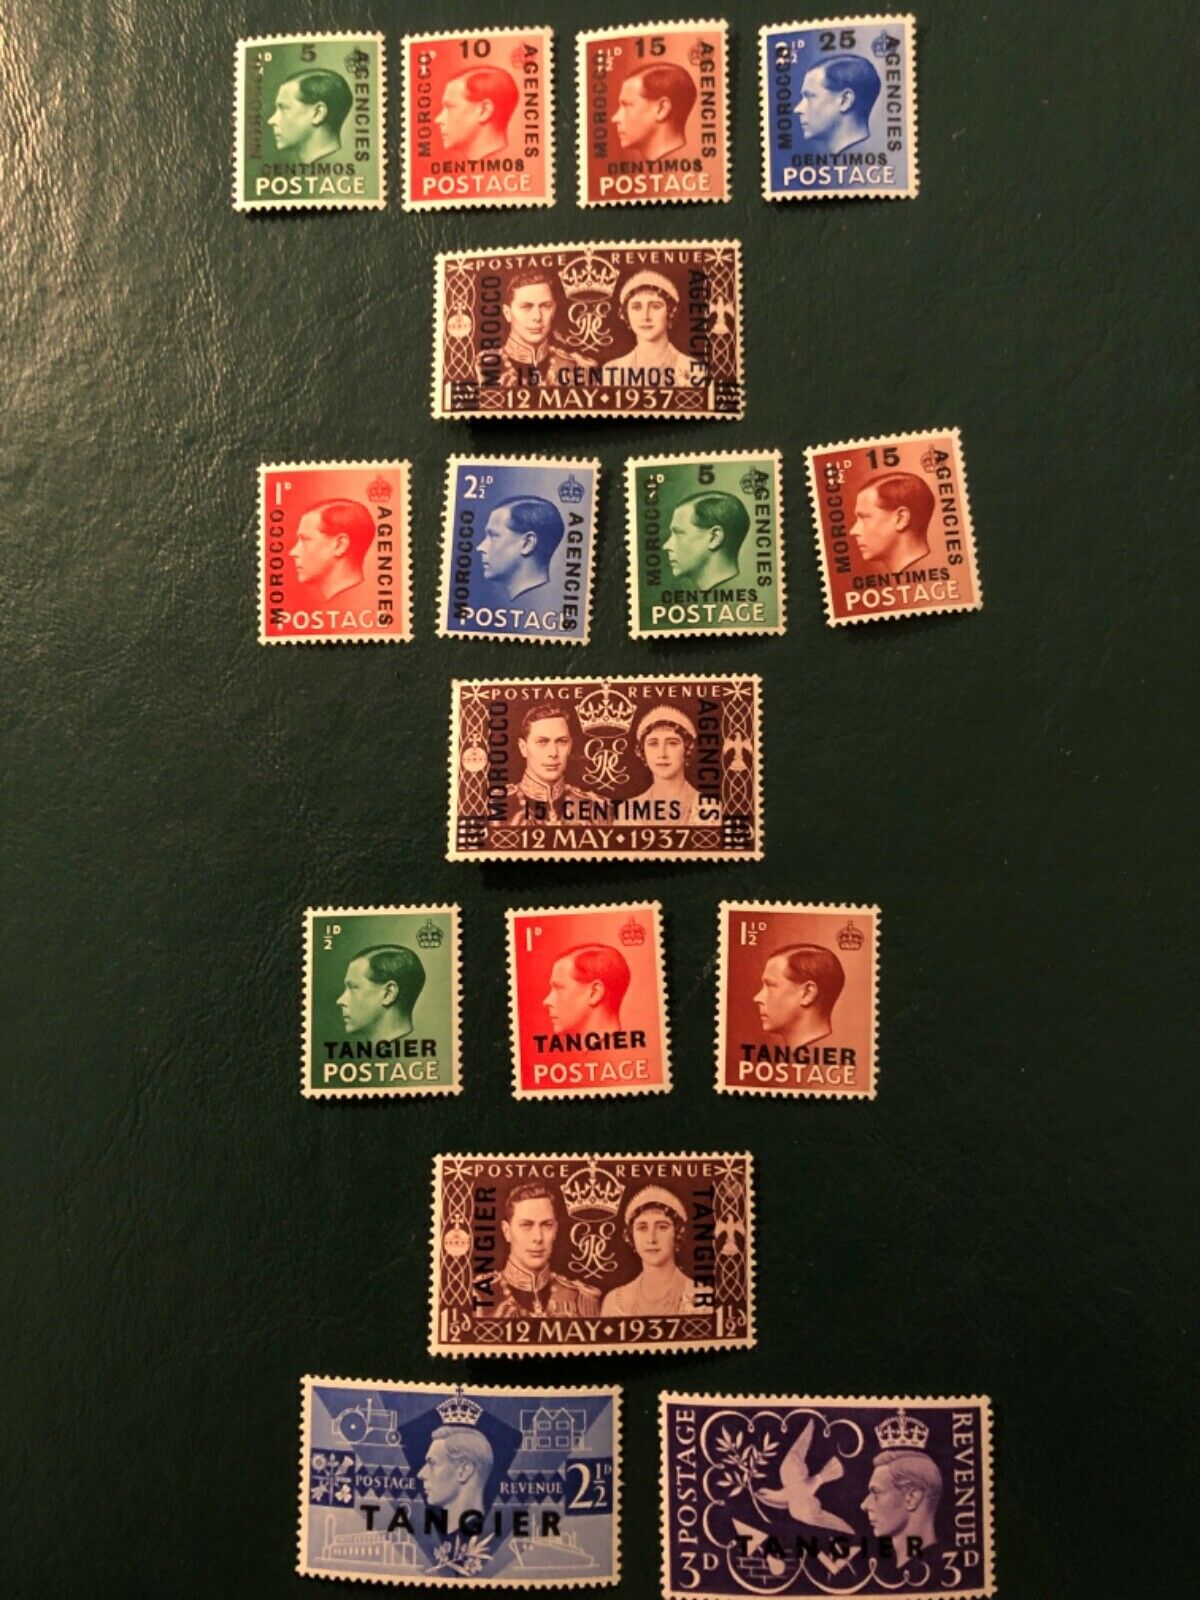 Morocco Stamps-1937 Abdication/coronation Stamps Mnh Complete